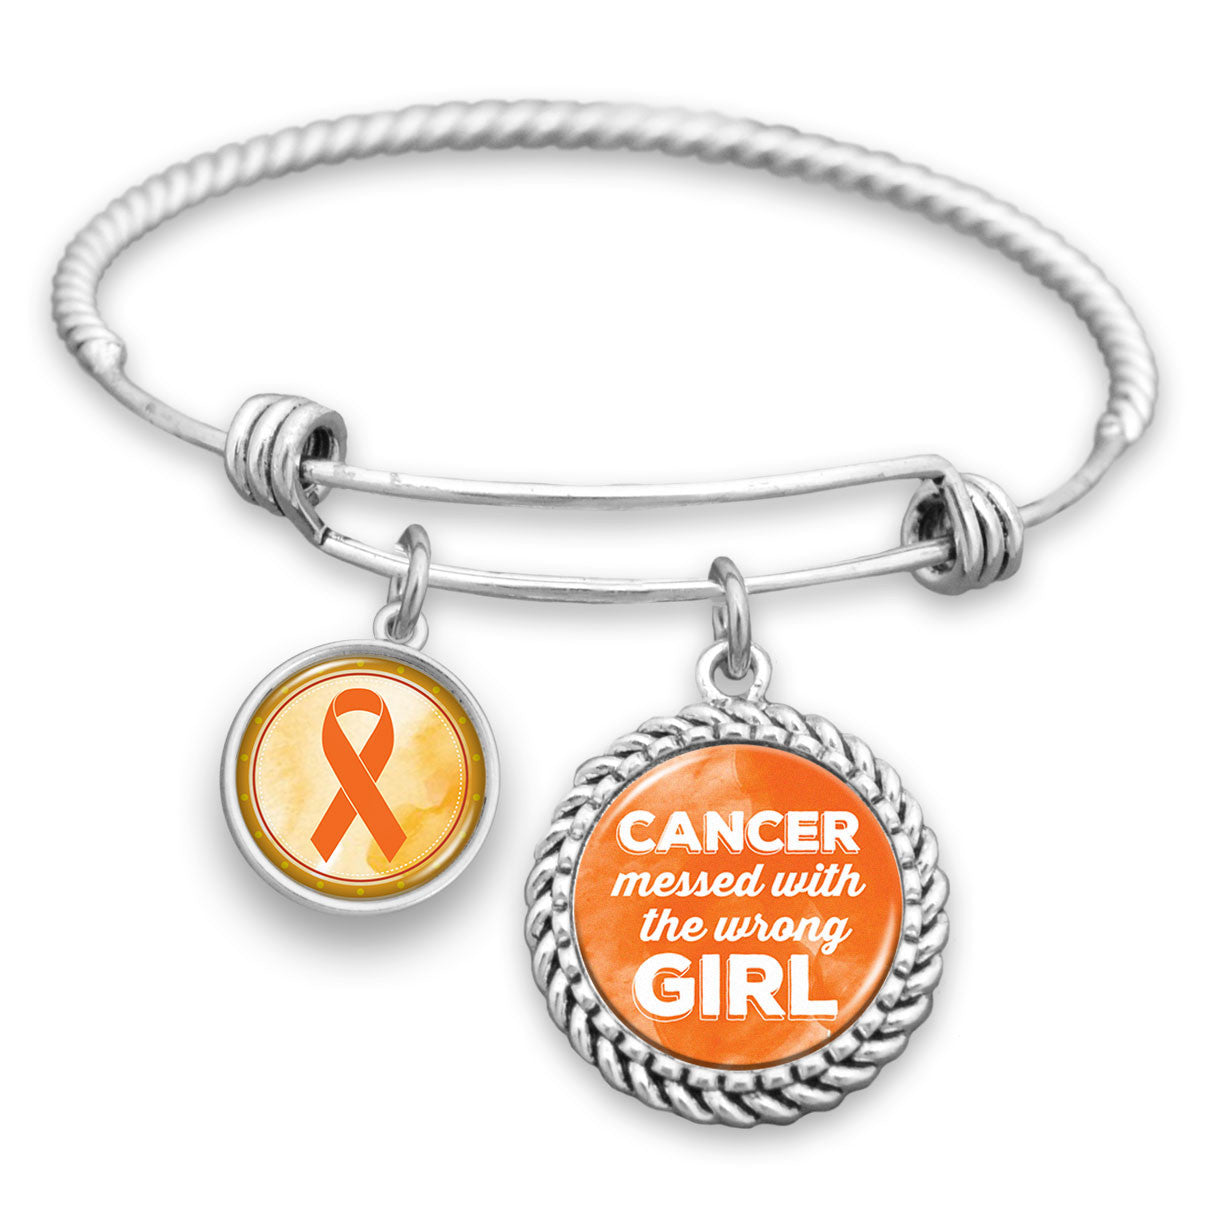 Leukemia Awareness "Cancer Messed With The Wrong Girl" Charm Bracelet